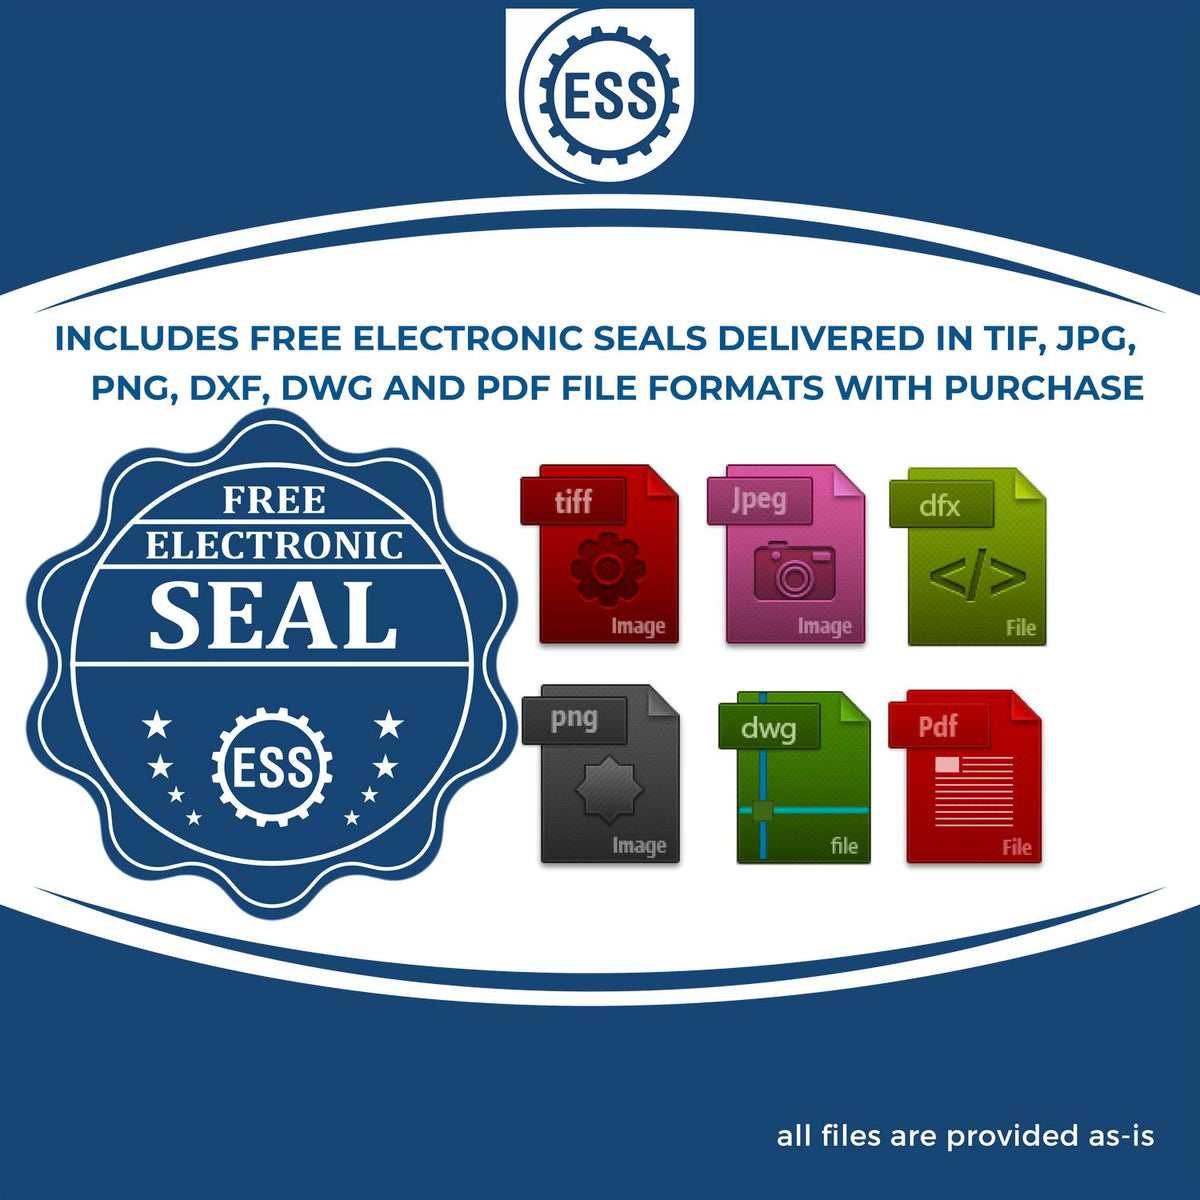 An infographic for the free electronic seal for the Slim Pre-Inked Kentucky Professional Engineer Seal Stamp illustrating the different file type icons such as DXF, DWG, TIF, JPG and PNG.